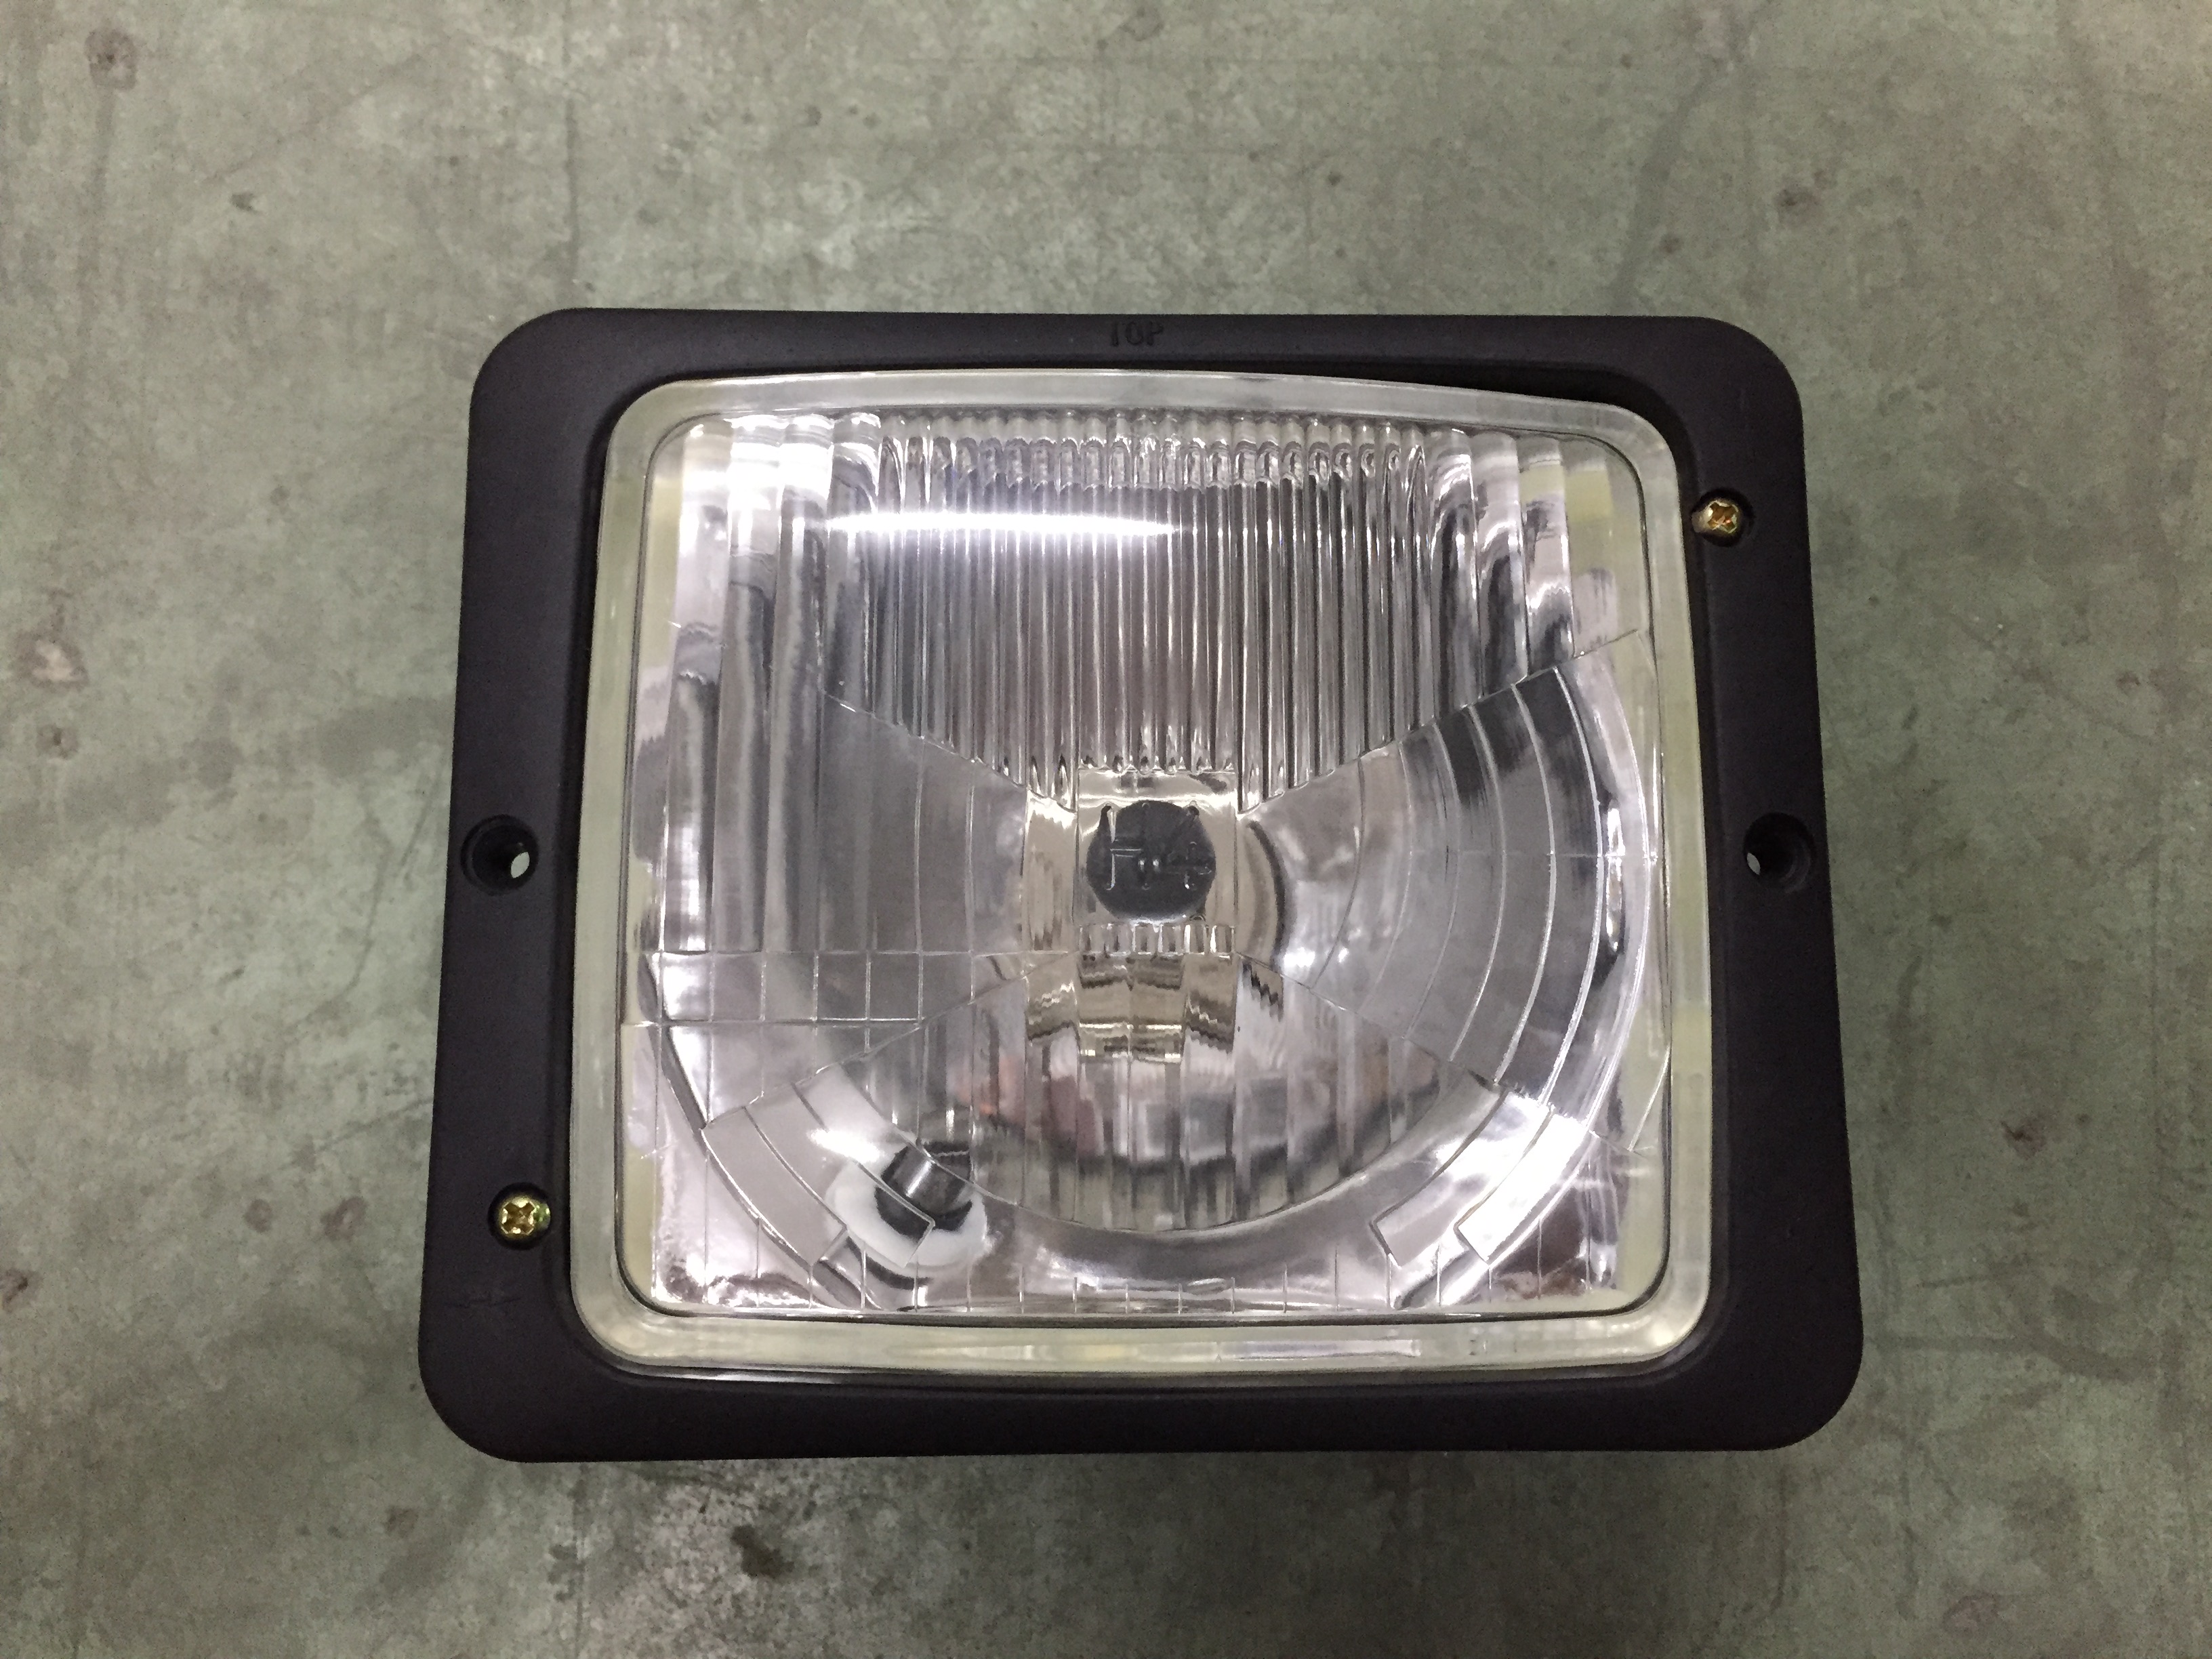 142-8637 replacement lamp light fitting for CAT skid steer Loader